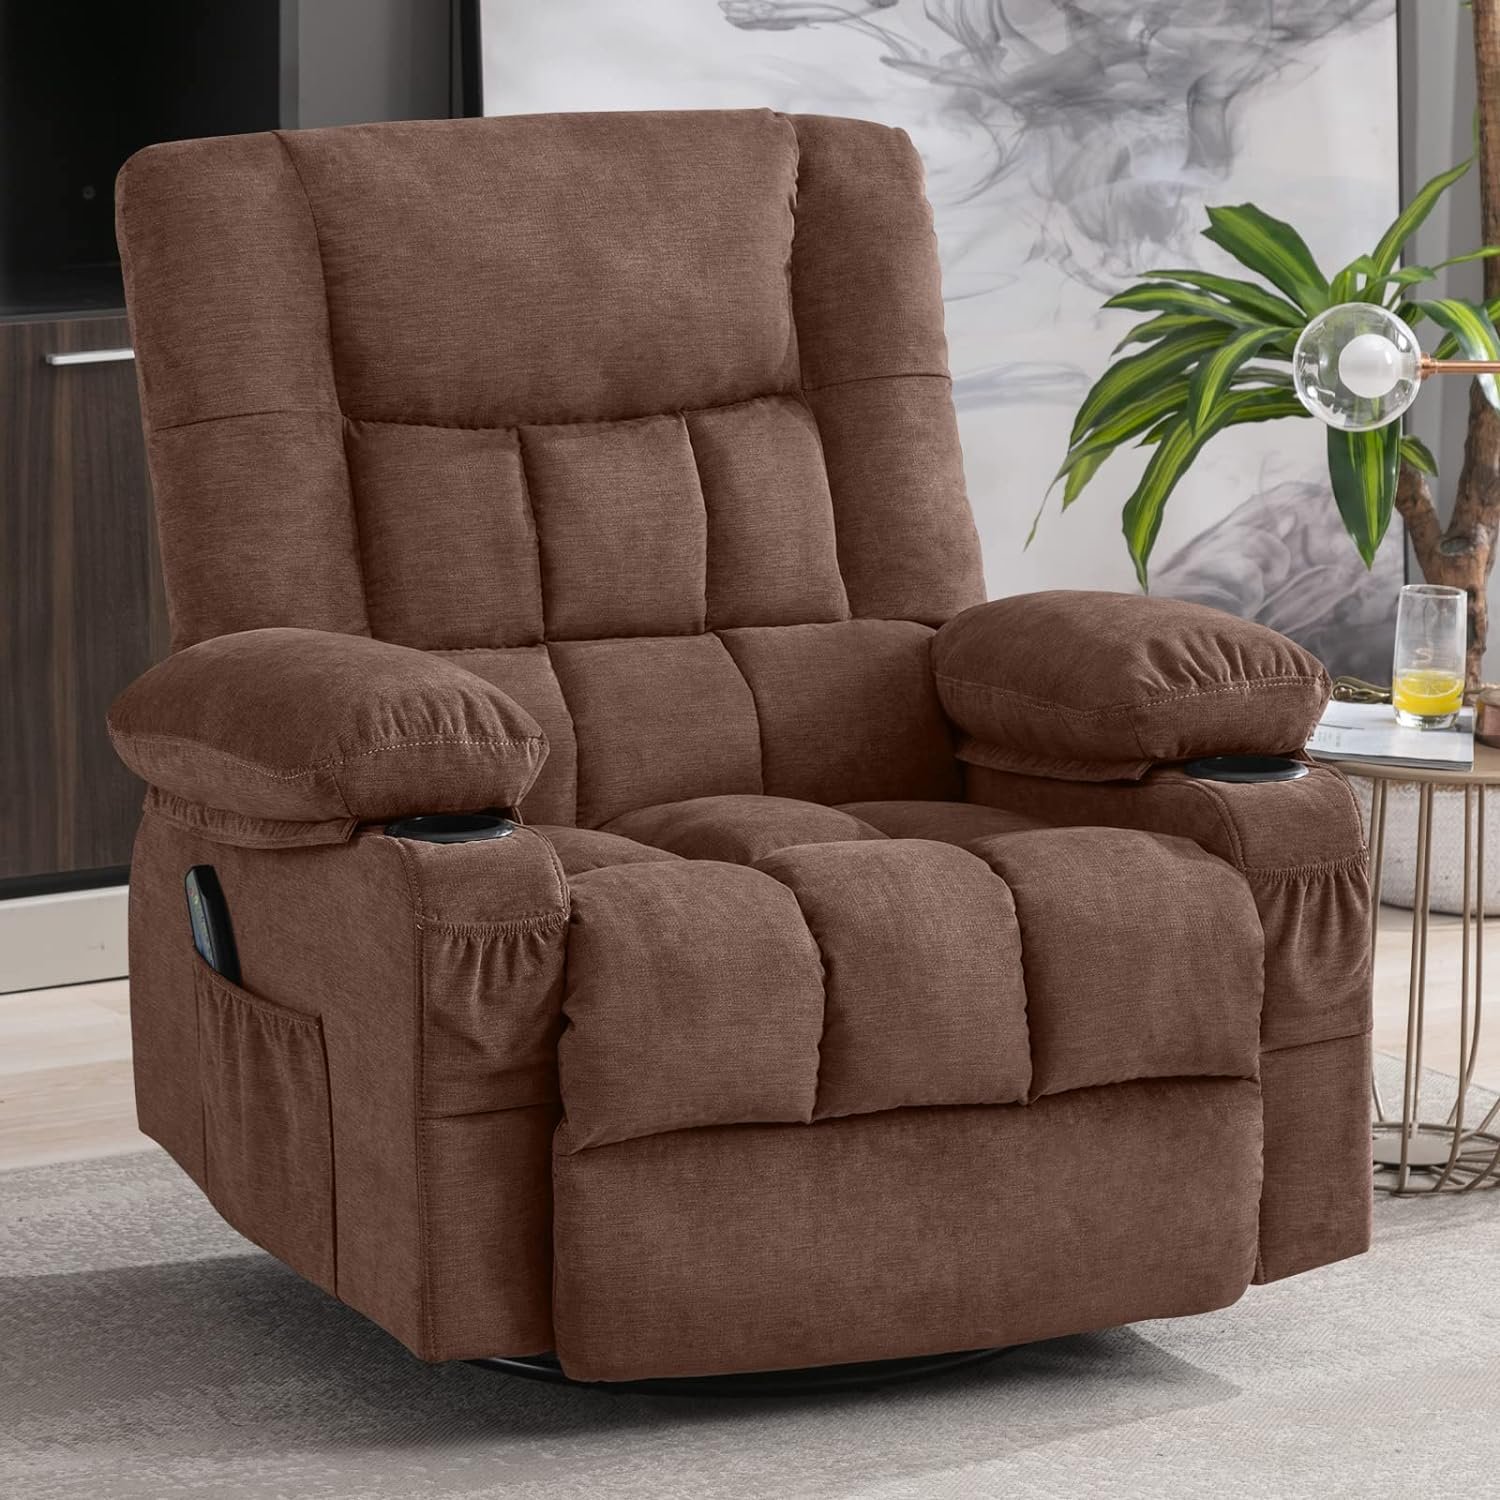 BOSMILLER Massage Swivel Rocker Recliner Chair with Vibration Massage and Heat Ergonomic Lounge Chair for Living Room with Rocking Function and Side Pocket, 2 Cup Holders, USB Charge Port